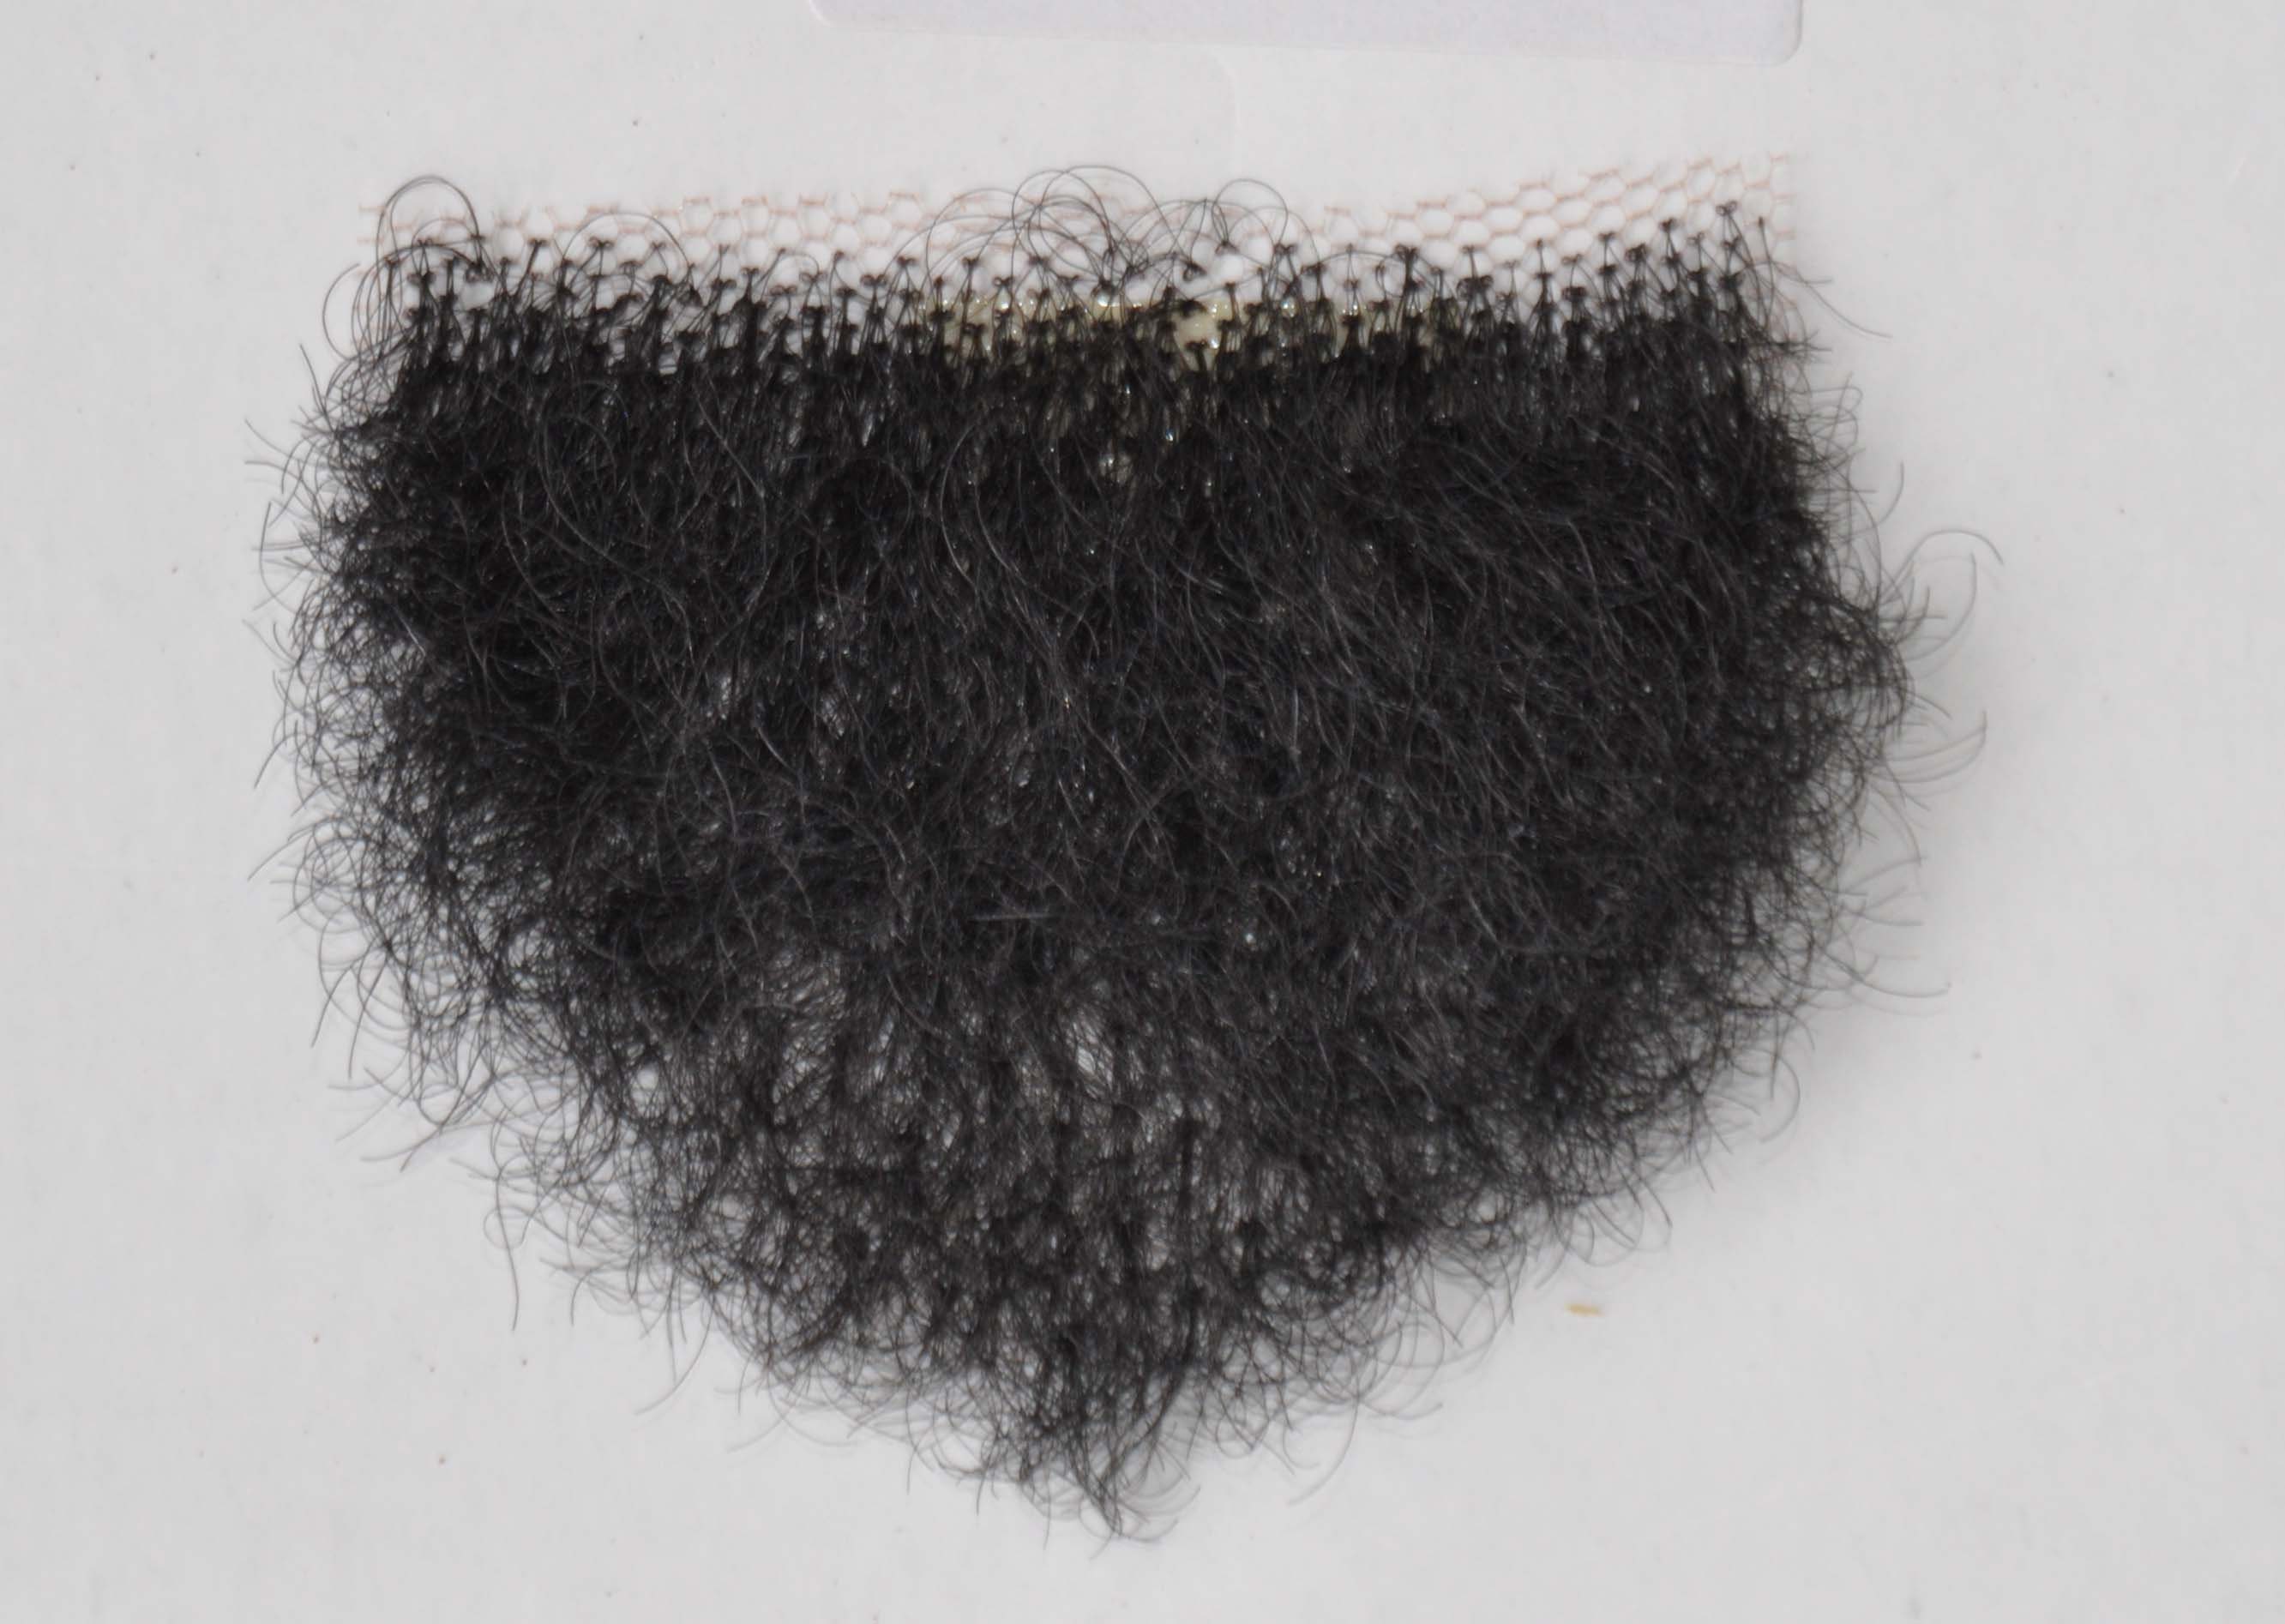 Merkin Pubic Toupee Pubic Wig Human Hair Very Small in Four - Etsy